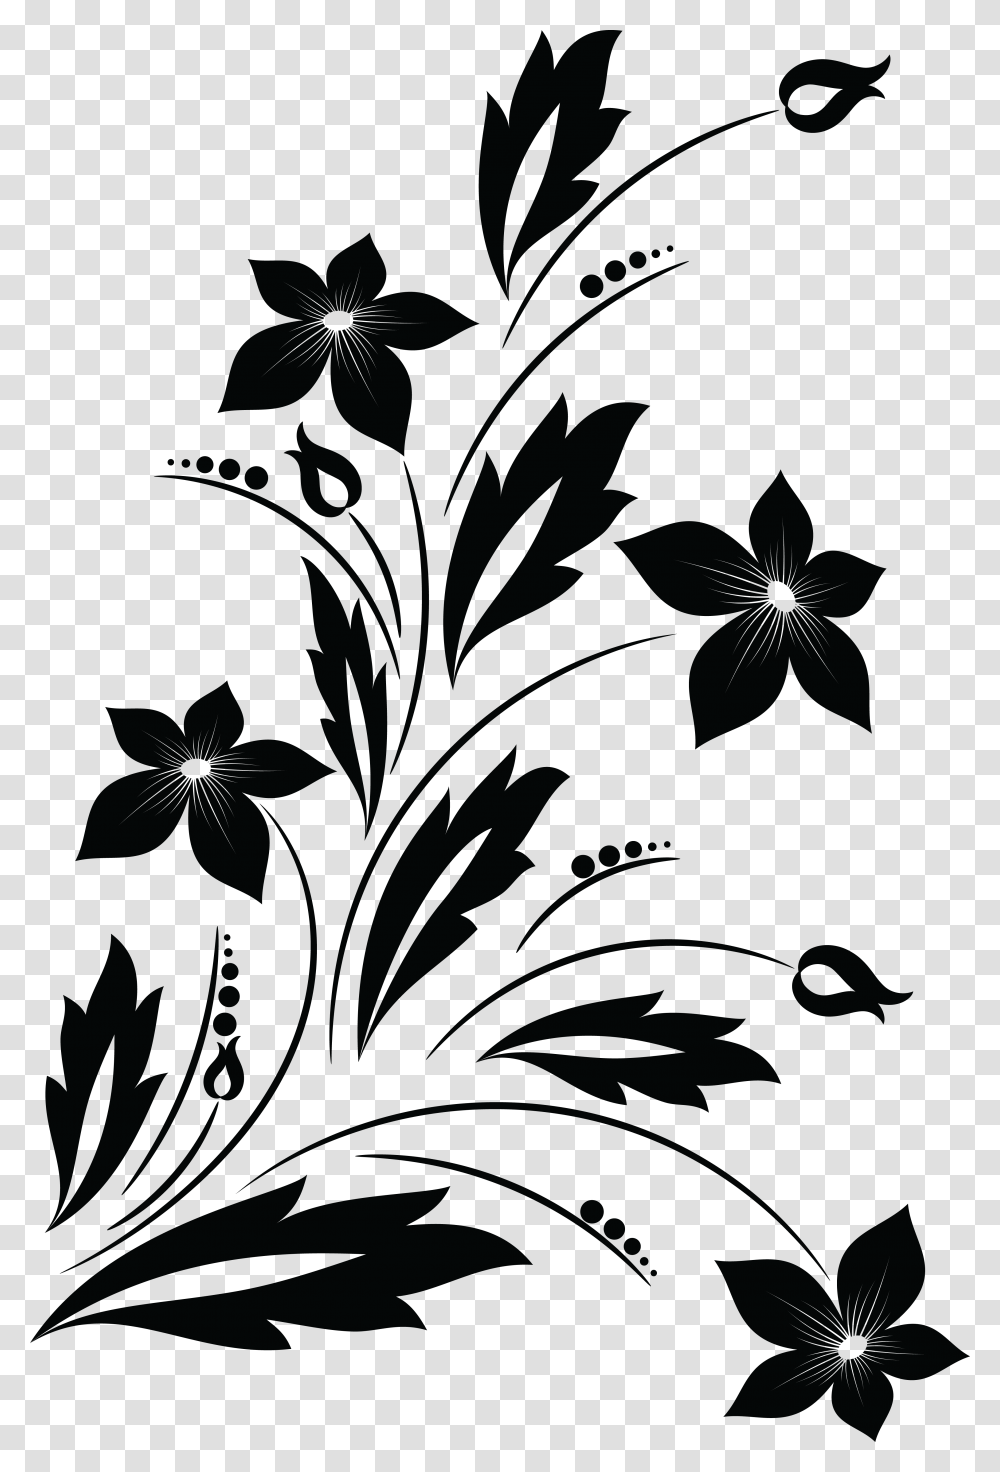 Flower Black And White Flower Clipart Black And White Floral Design Pattern Gray Transparent Png Pngset Com